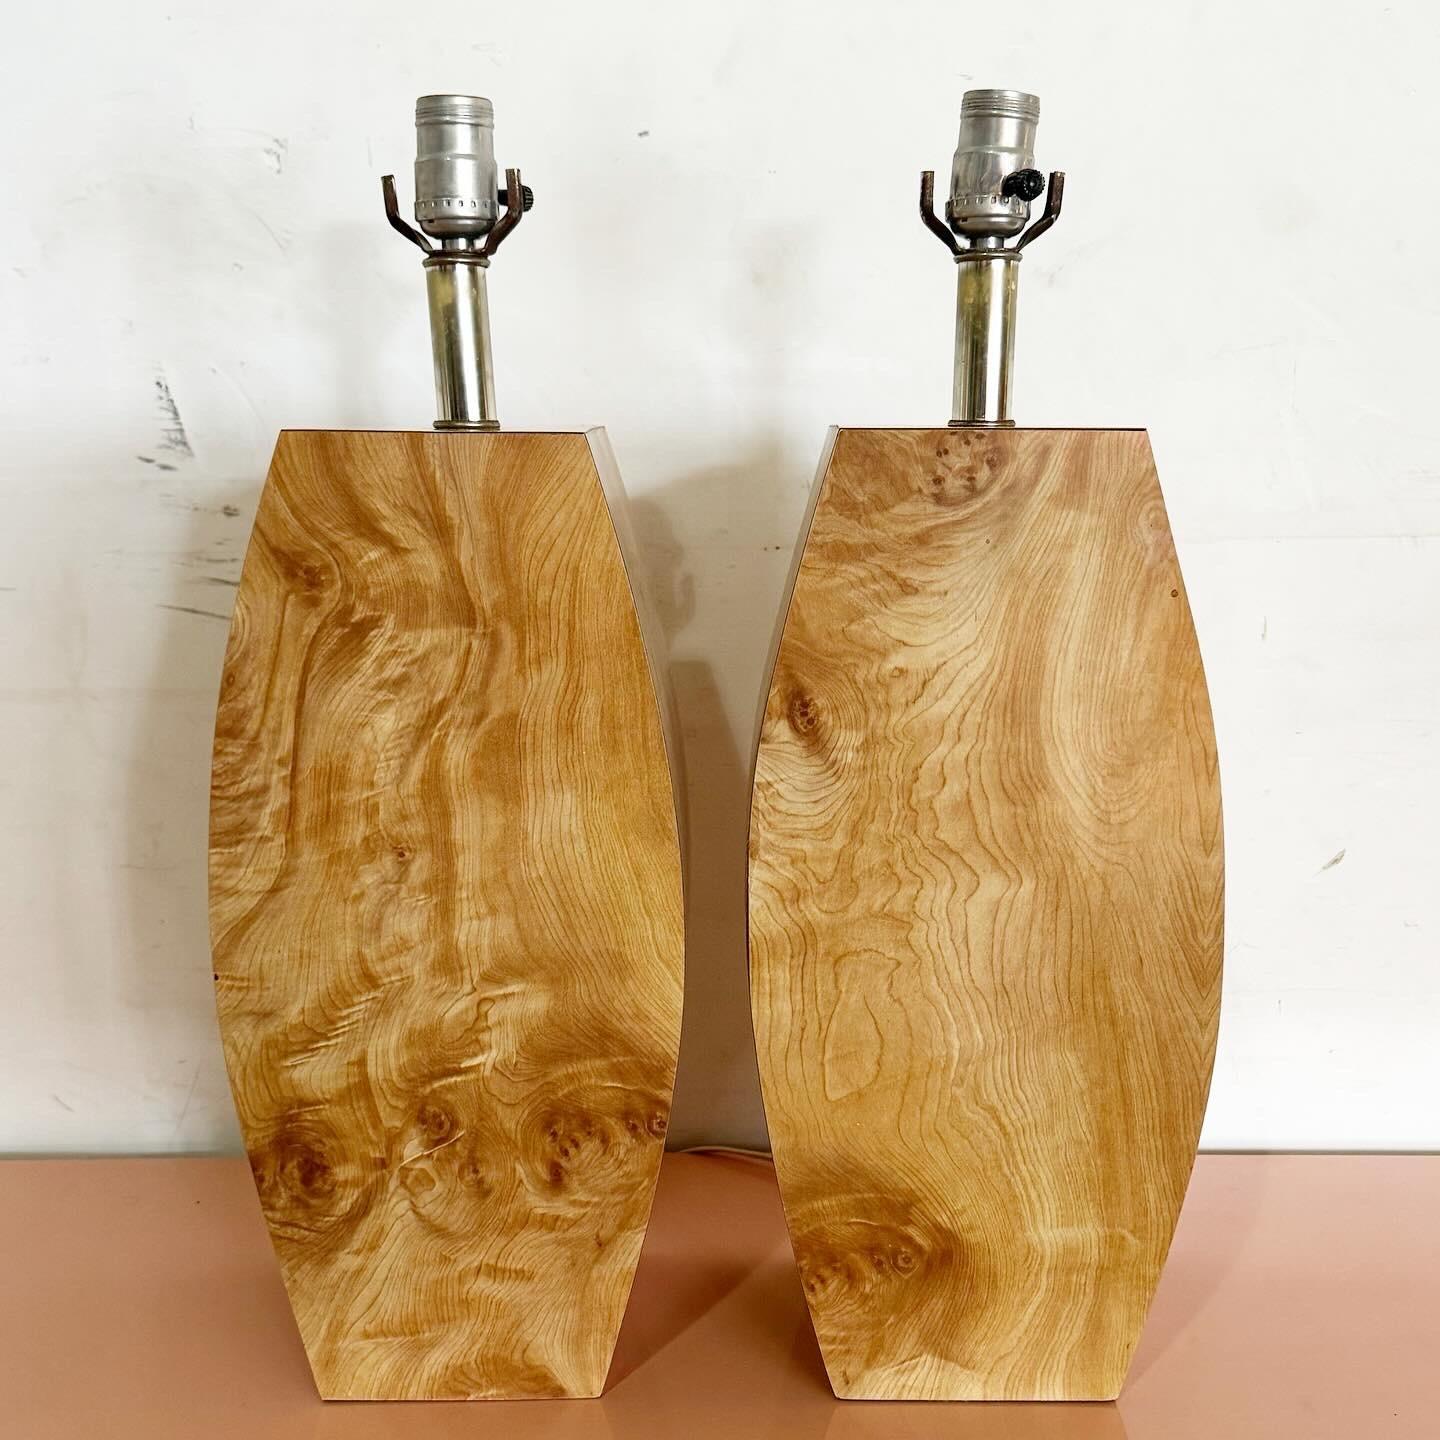 Late 20th Century Postmodern Burl Wood Laminate Table Lamps - a Pair For Sale